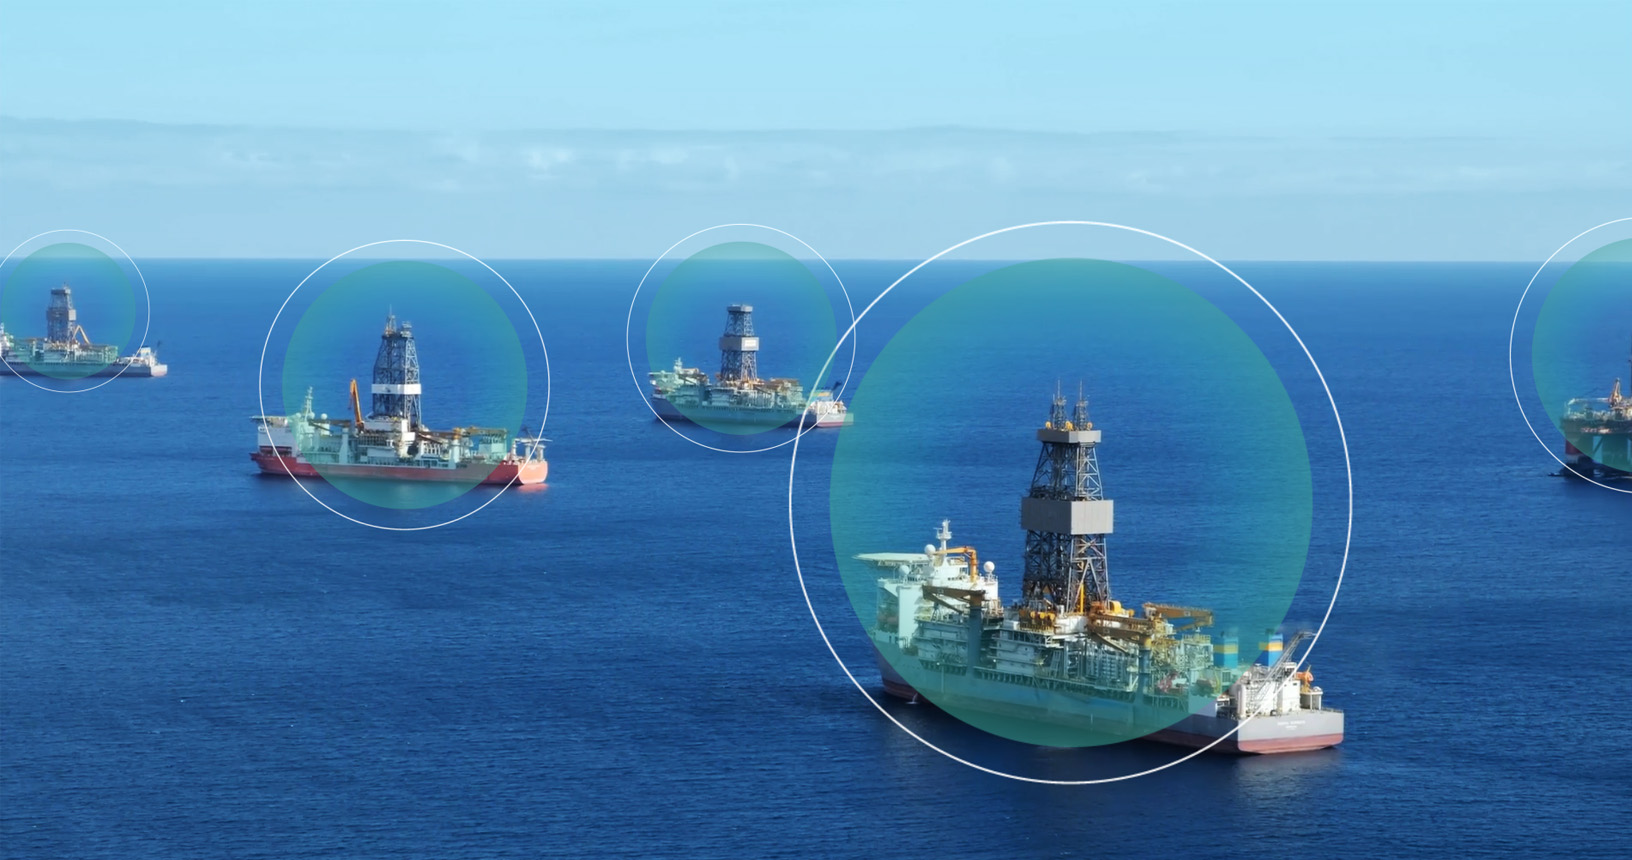 Drilling vessels at sea equipped with positioning technology